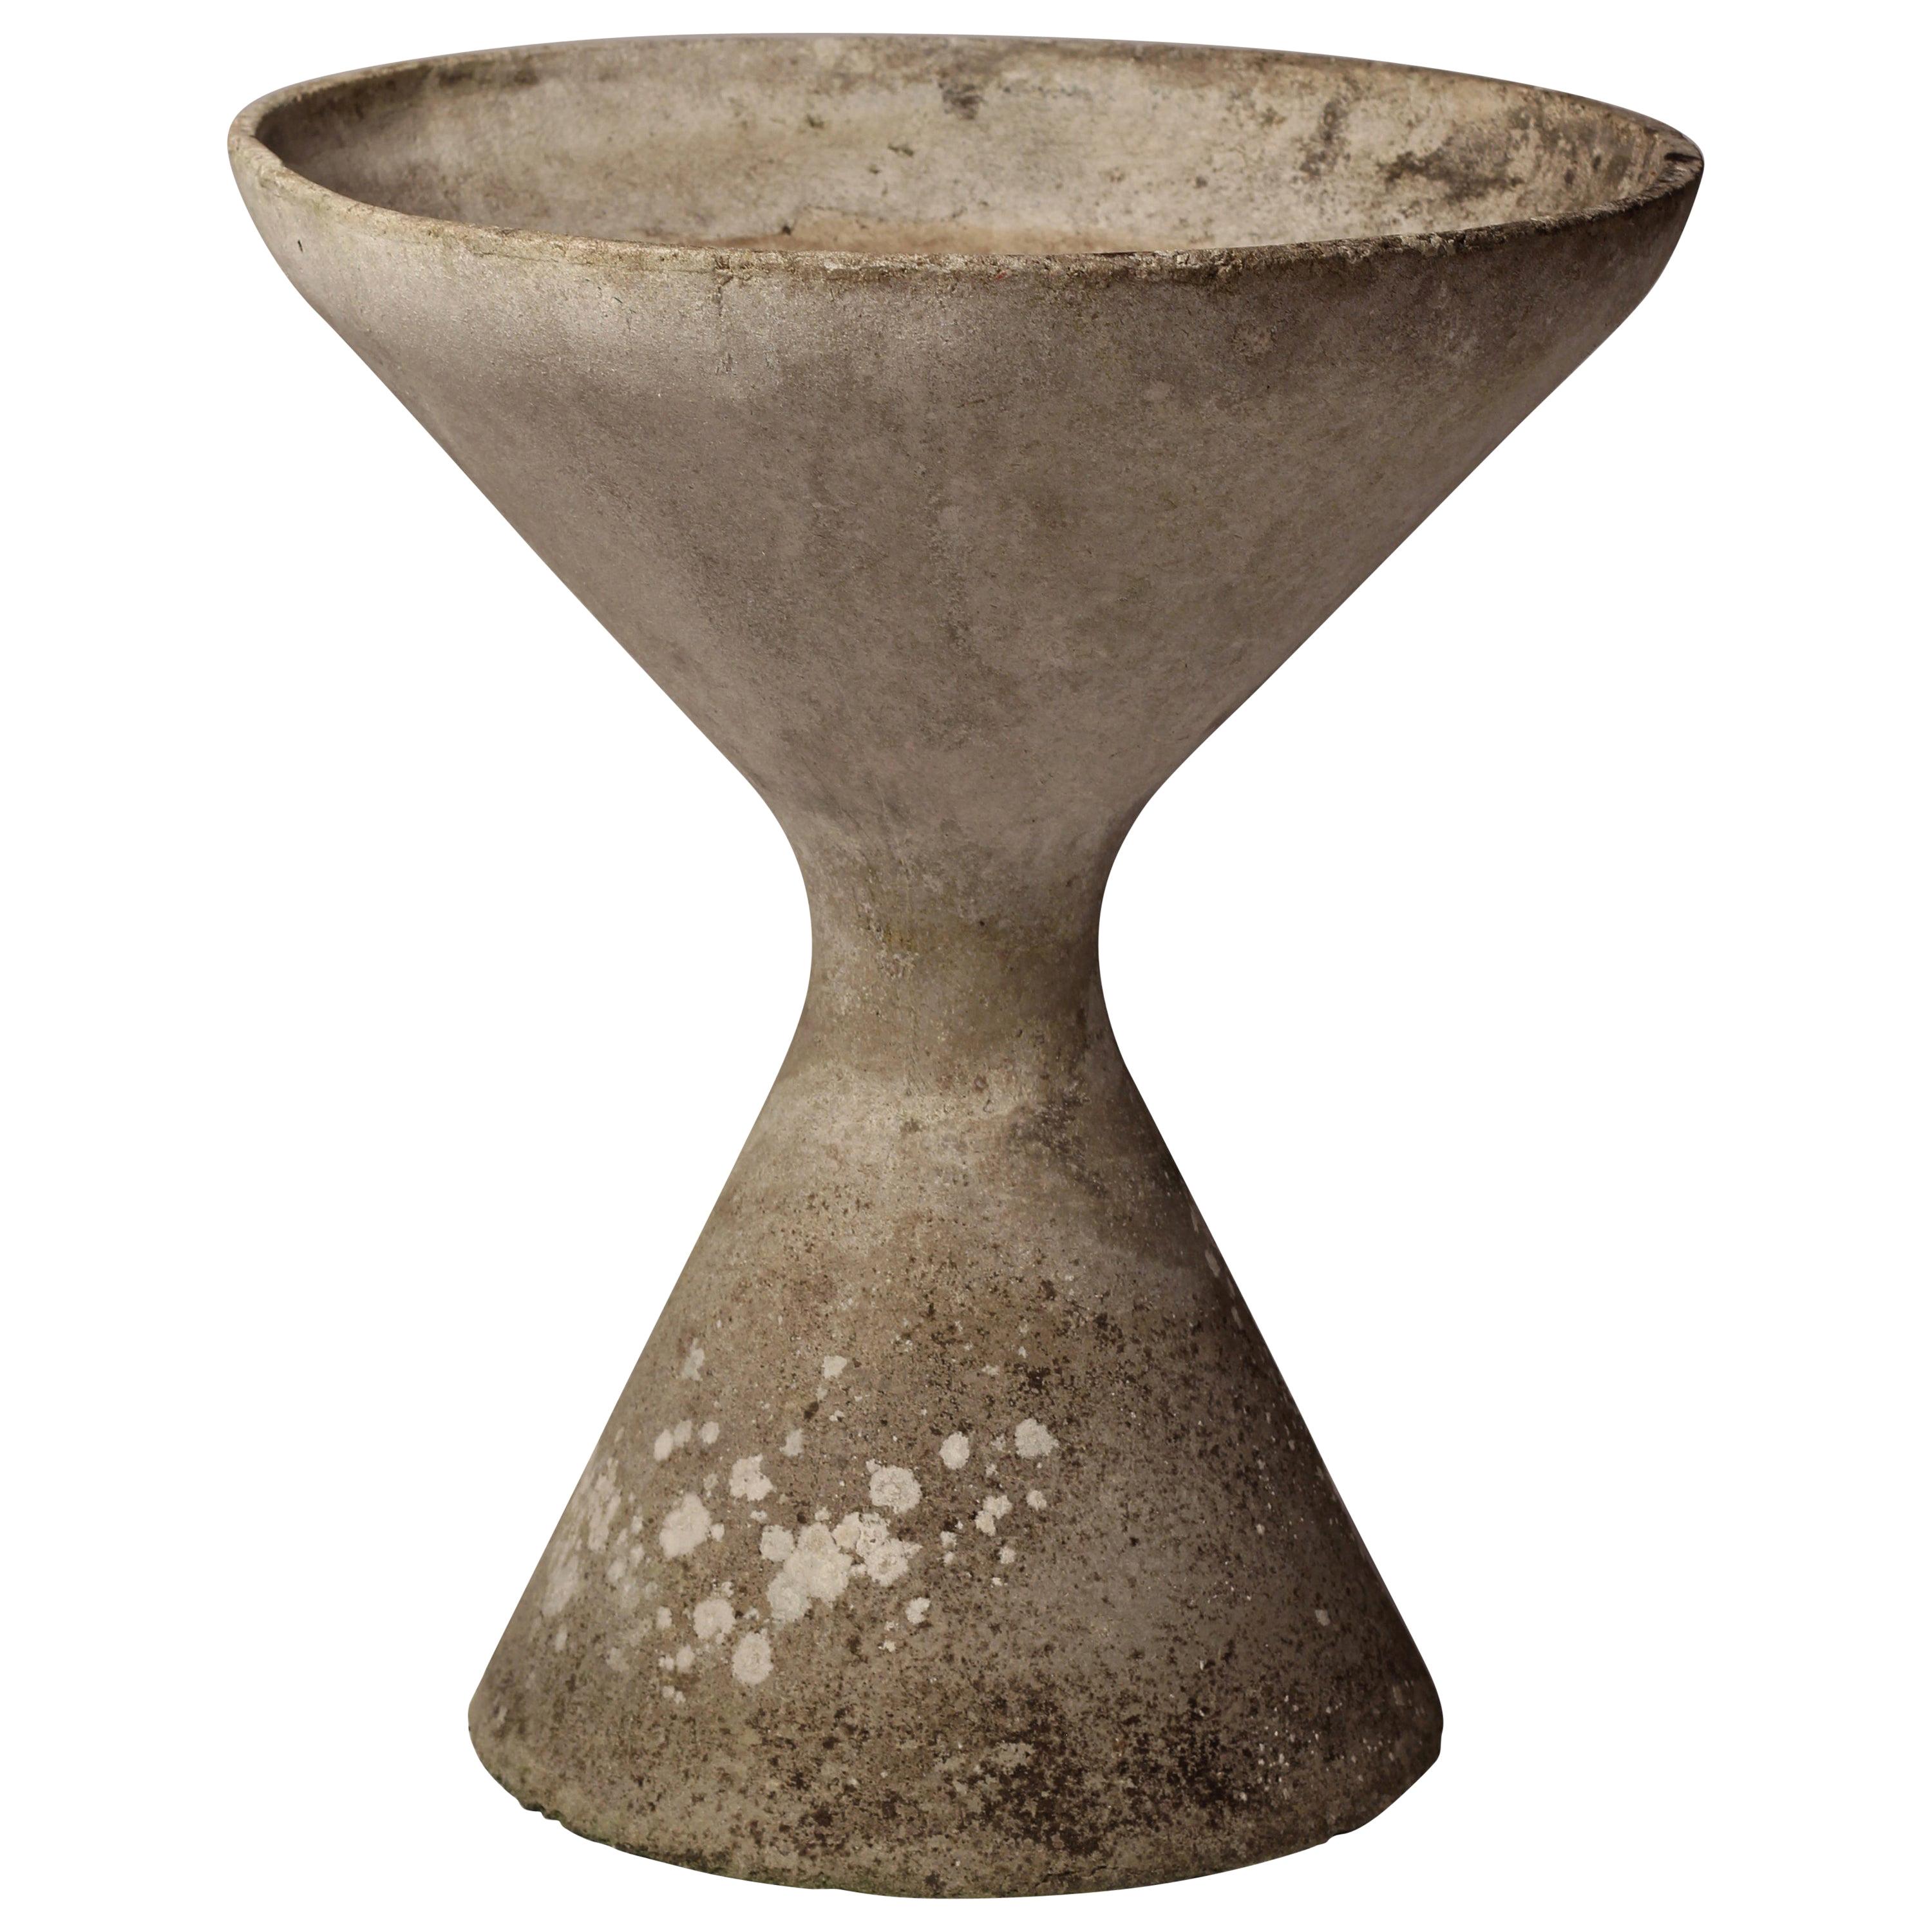 Mid-Century Modern Concrete Planter by Willy Guhl Hourglass